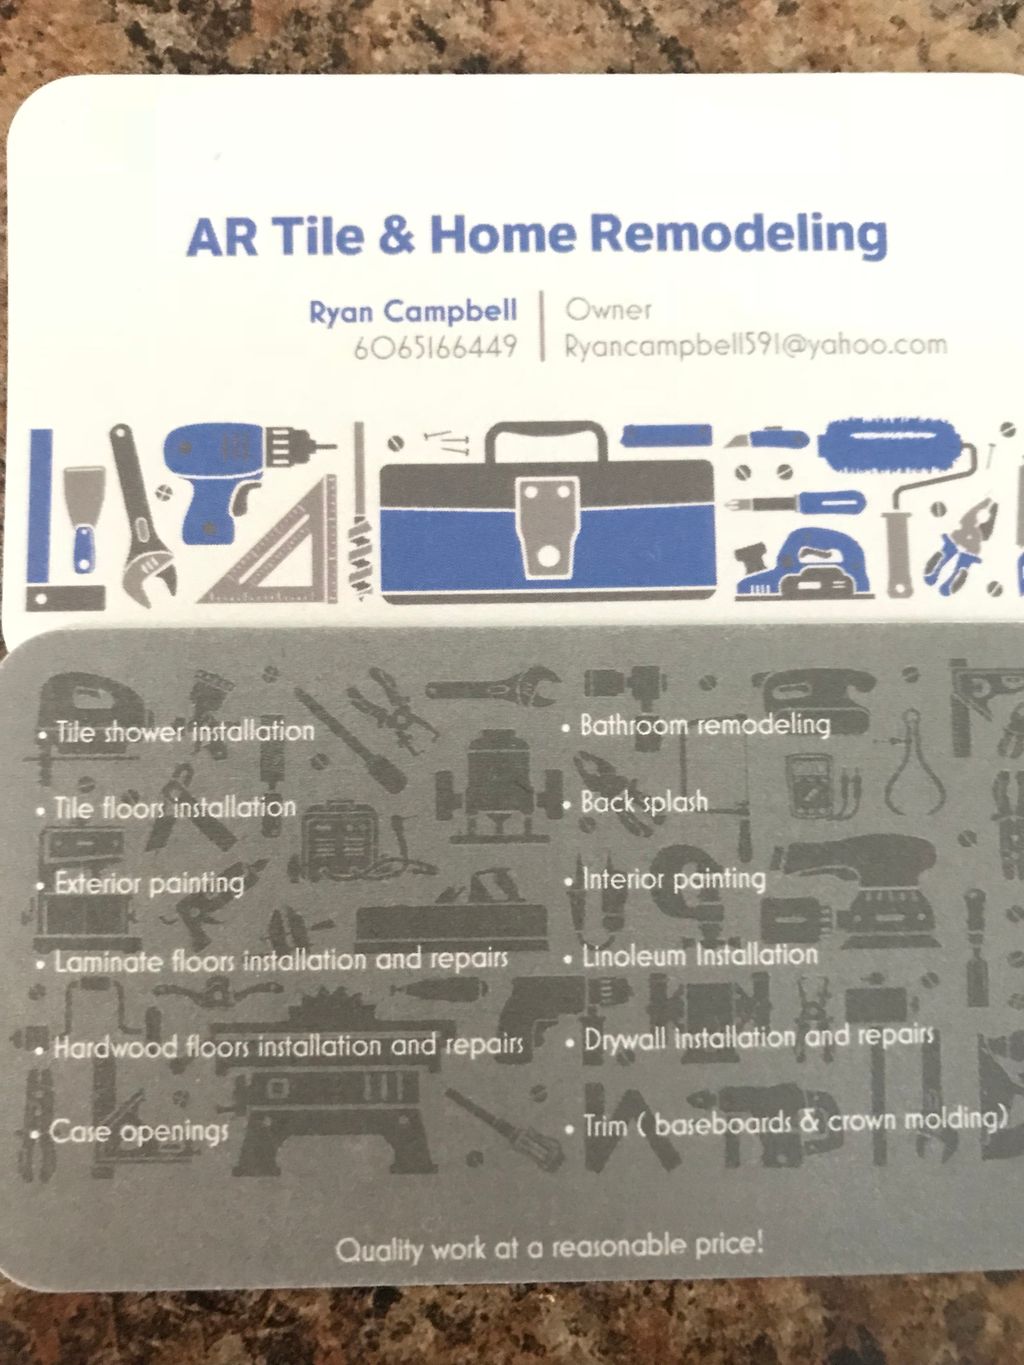 AR Tile And Home Remodeling